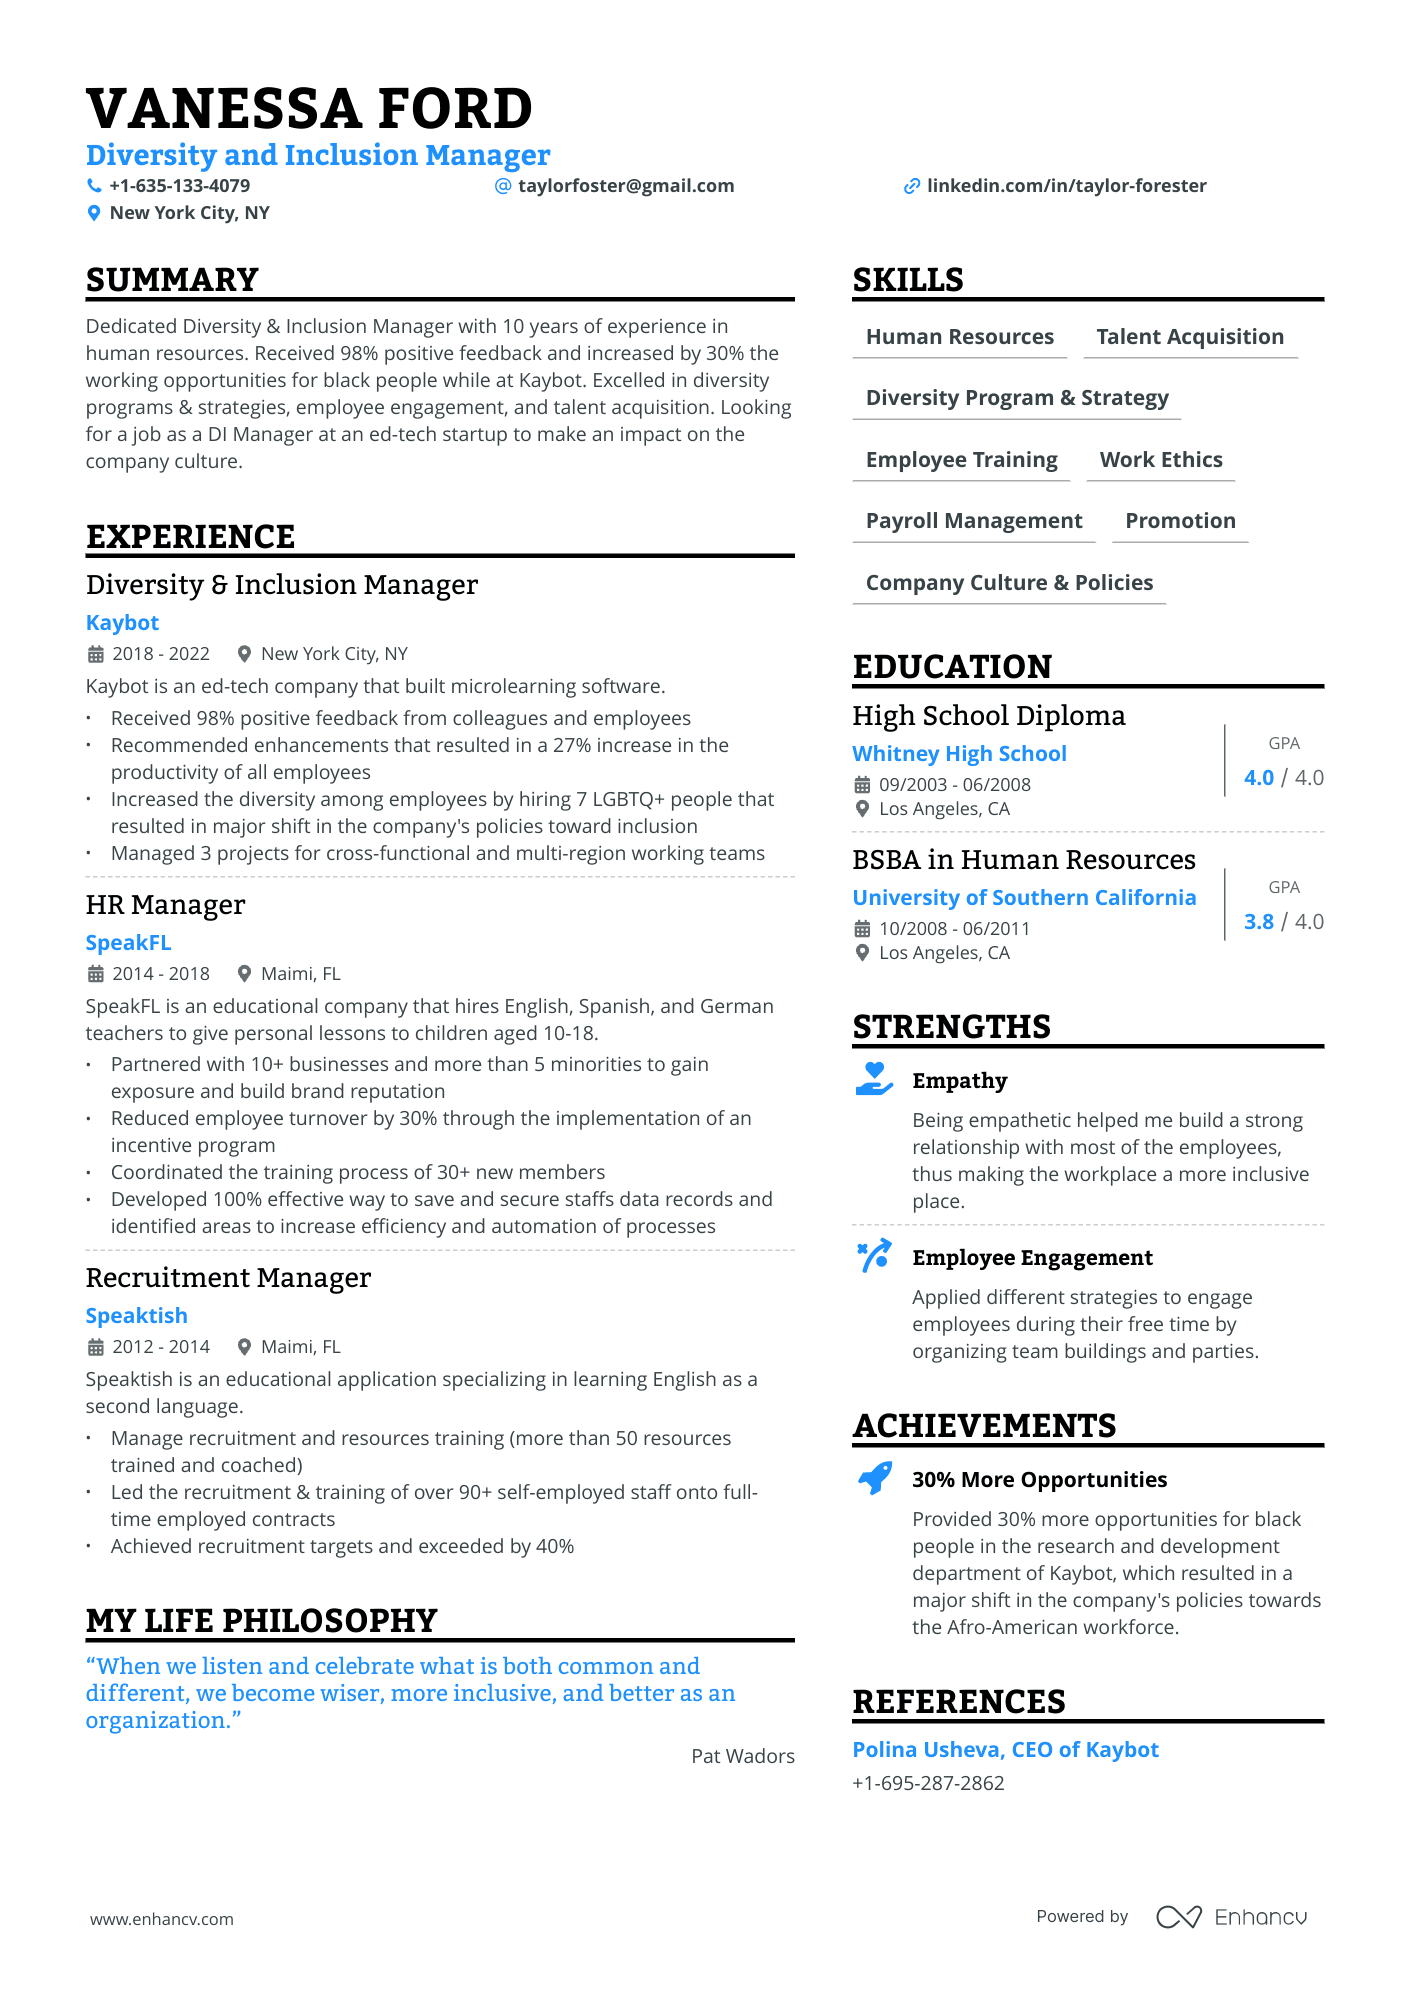 Diversity And Inclusion Manager resume example